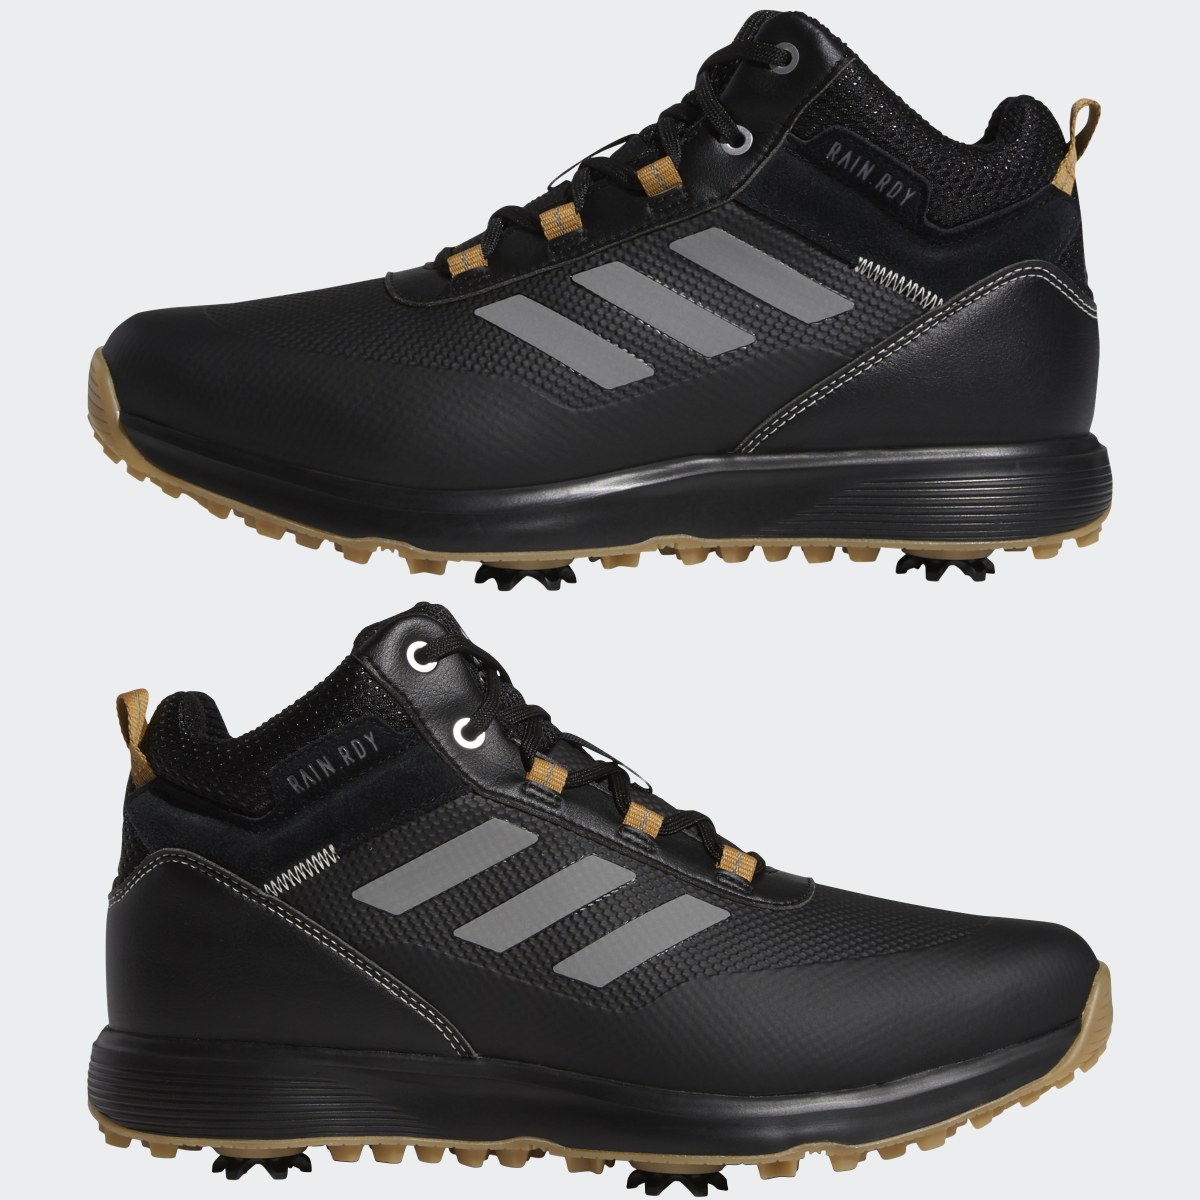 Adidas S2G Recycled Polyester Mid-Cut Golf Shoes. 10